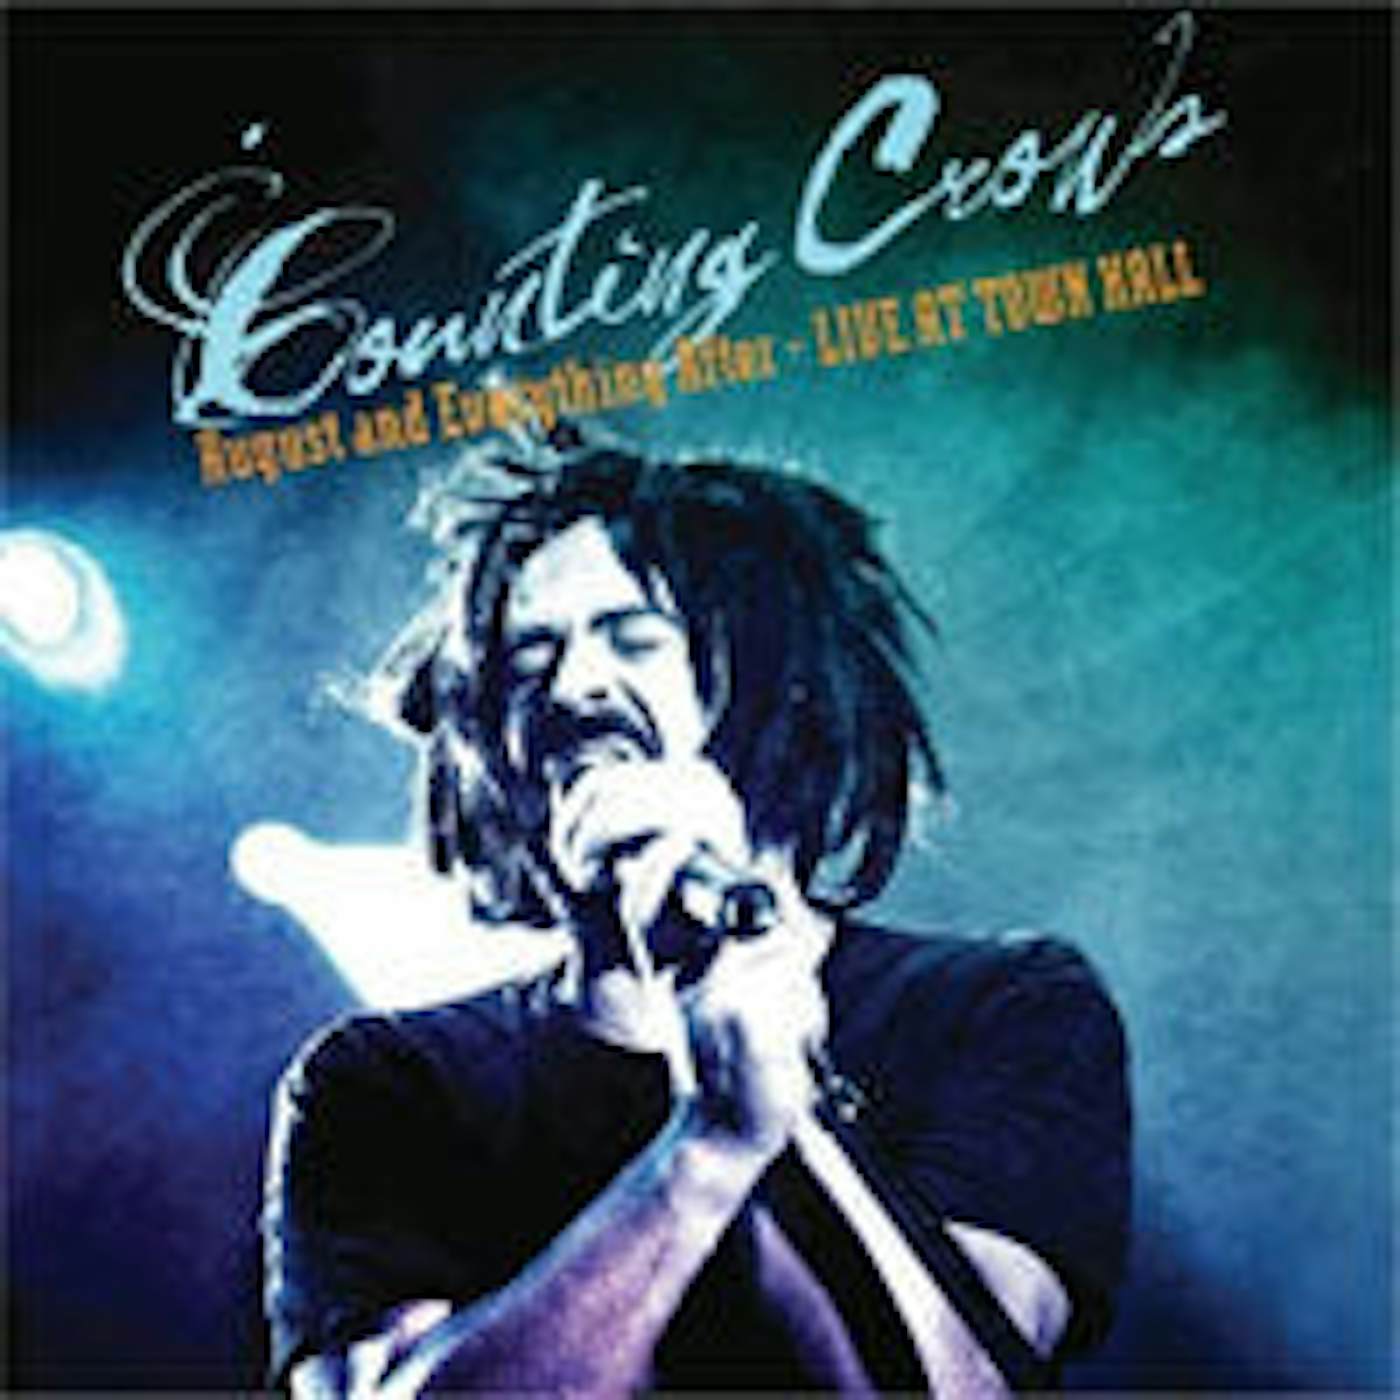 Counting Crows LP - August & Everything After Live From Town Hall (Vinyl)